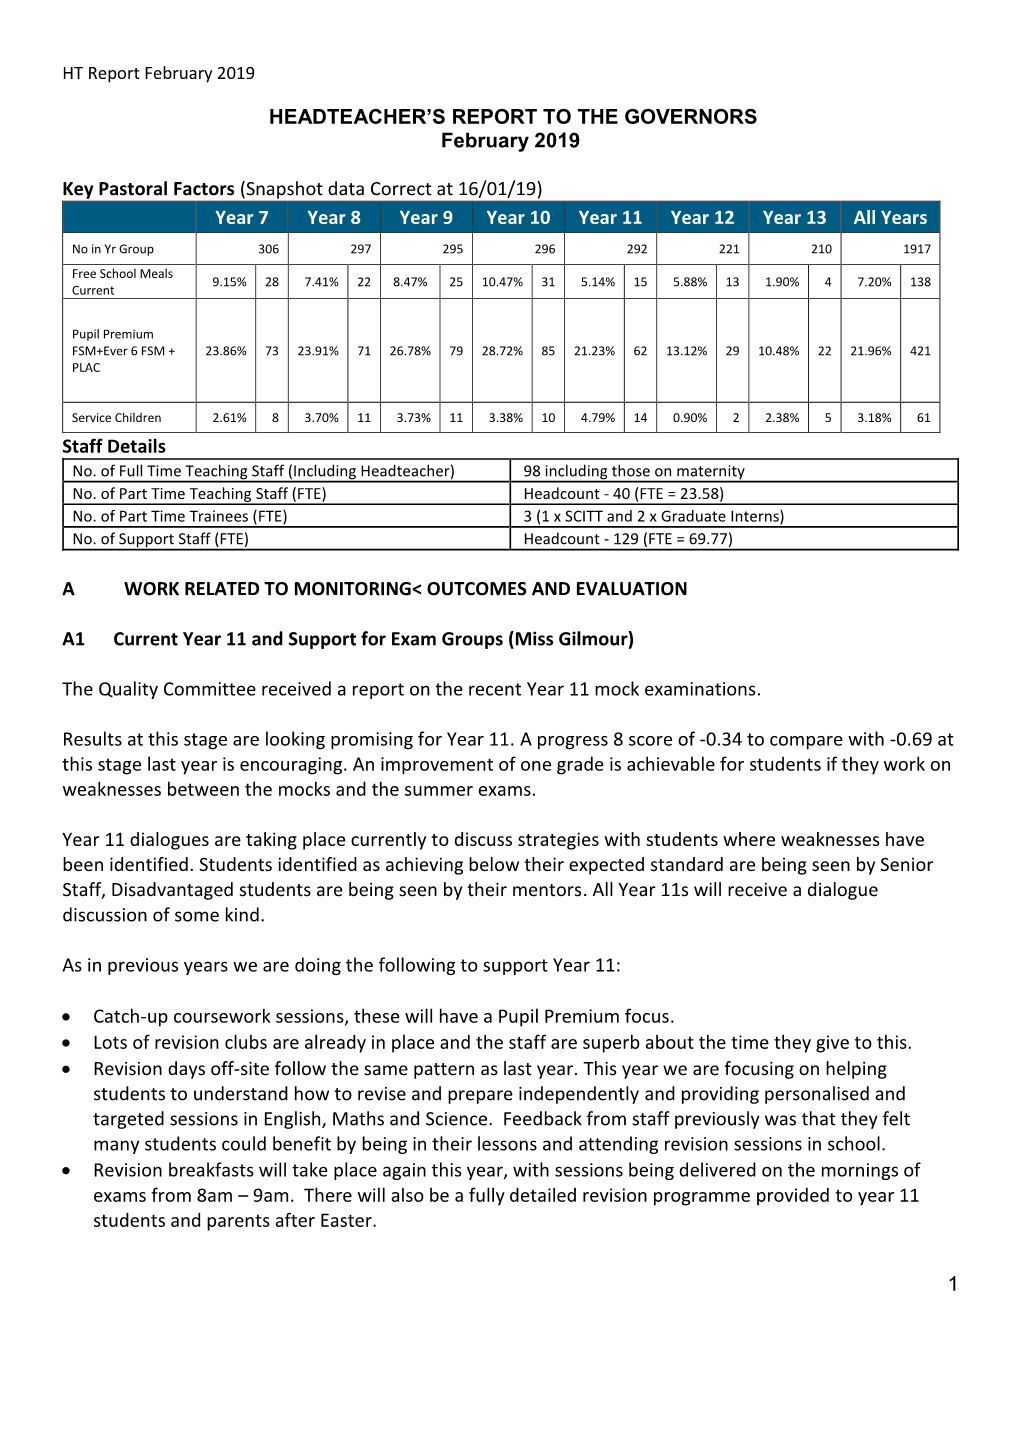 1 HEADTEACHER's REPORT to the GOVERNORS February 2019 Key Pastoral Factors (Snapshot Data Correct at 16/01/19) Year 7 Year 8